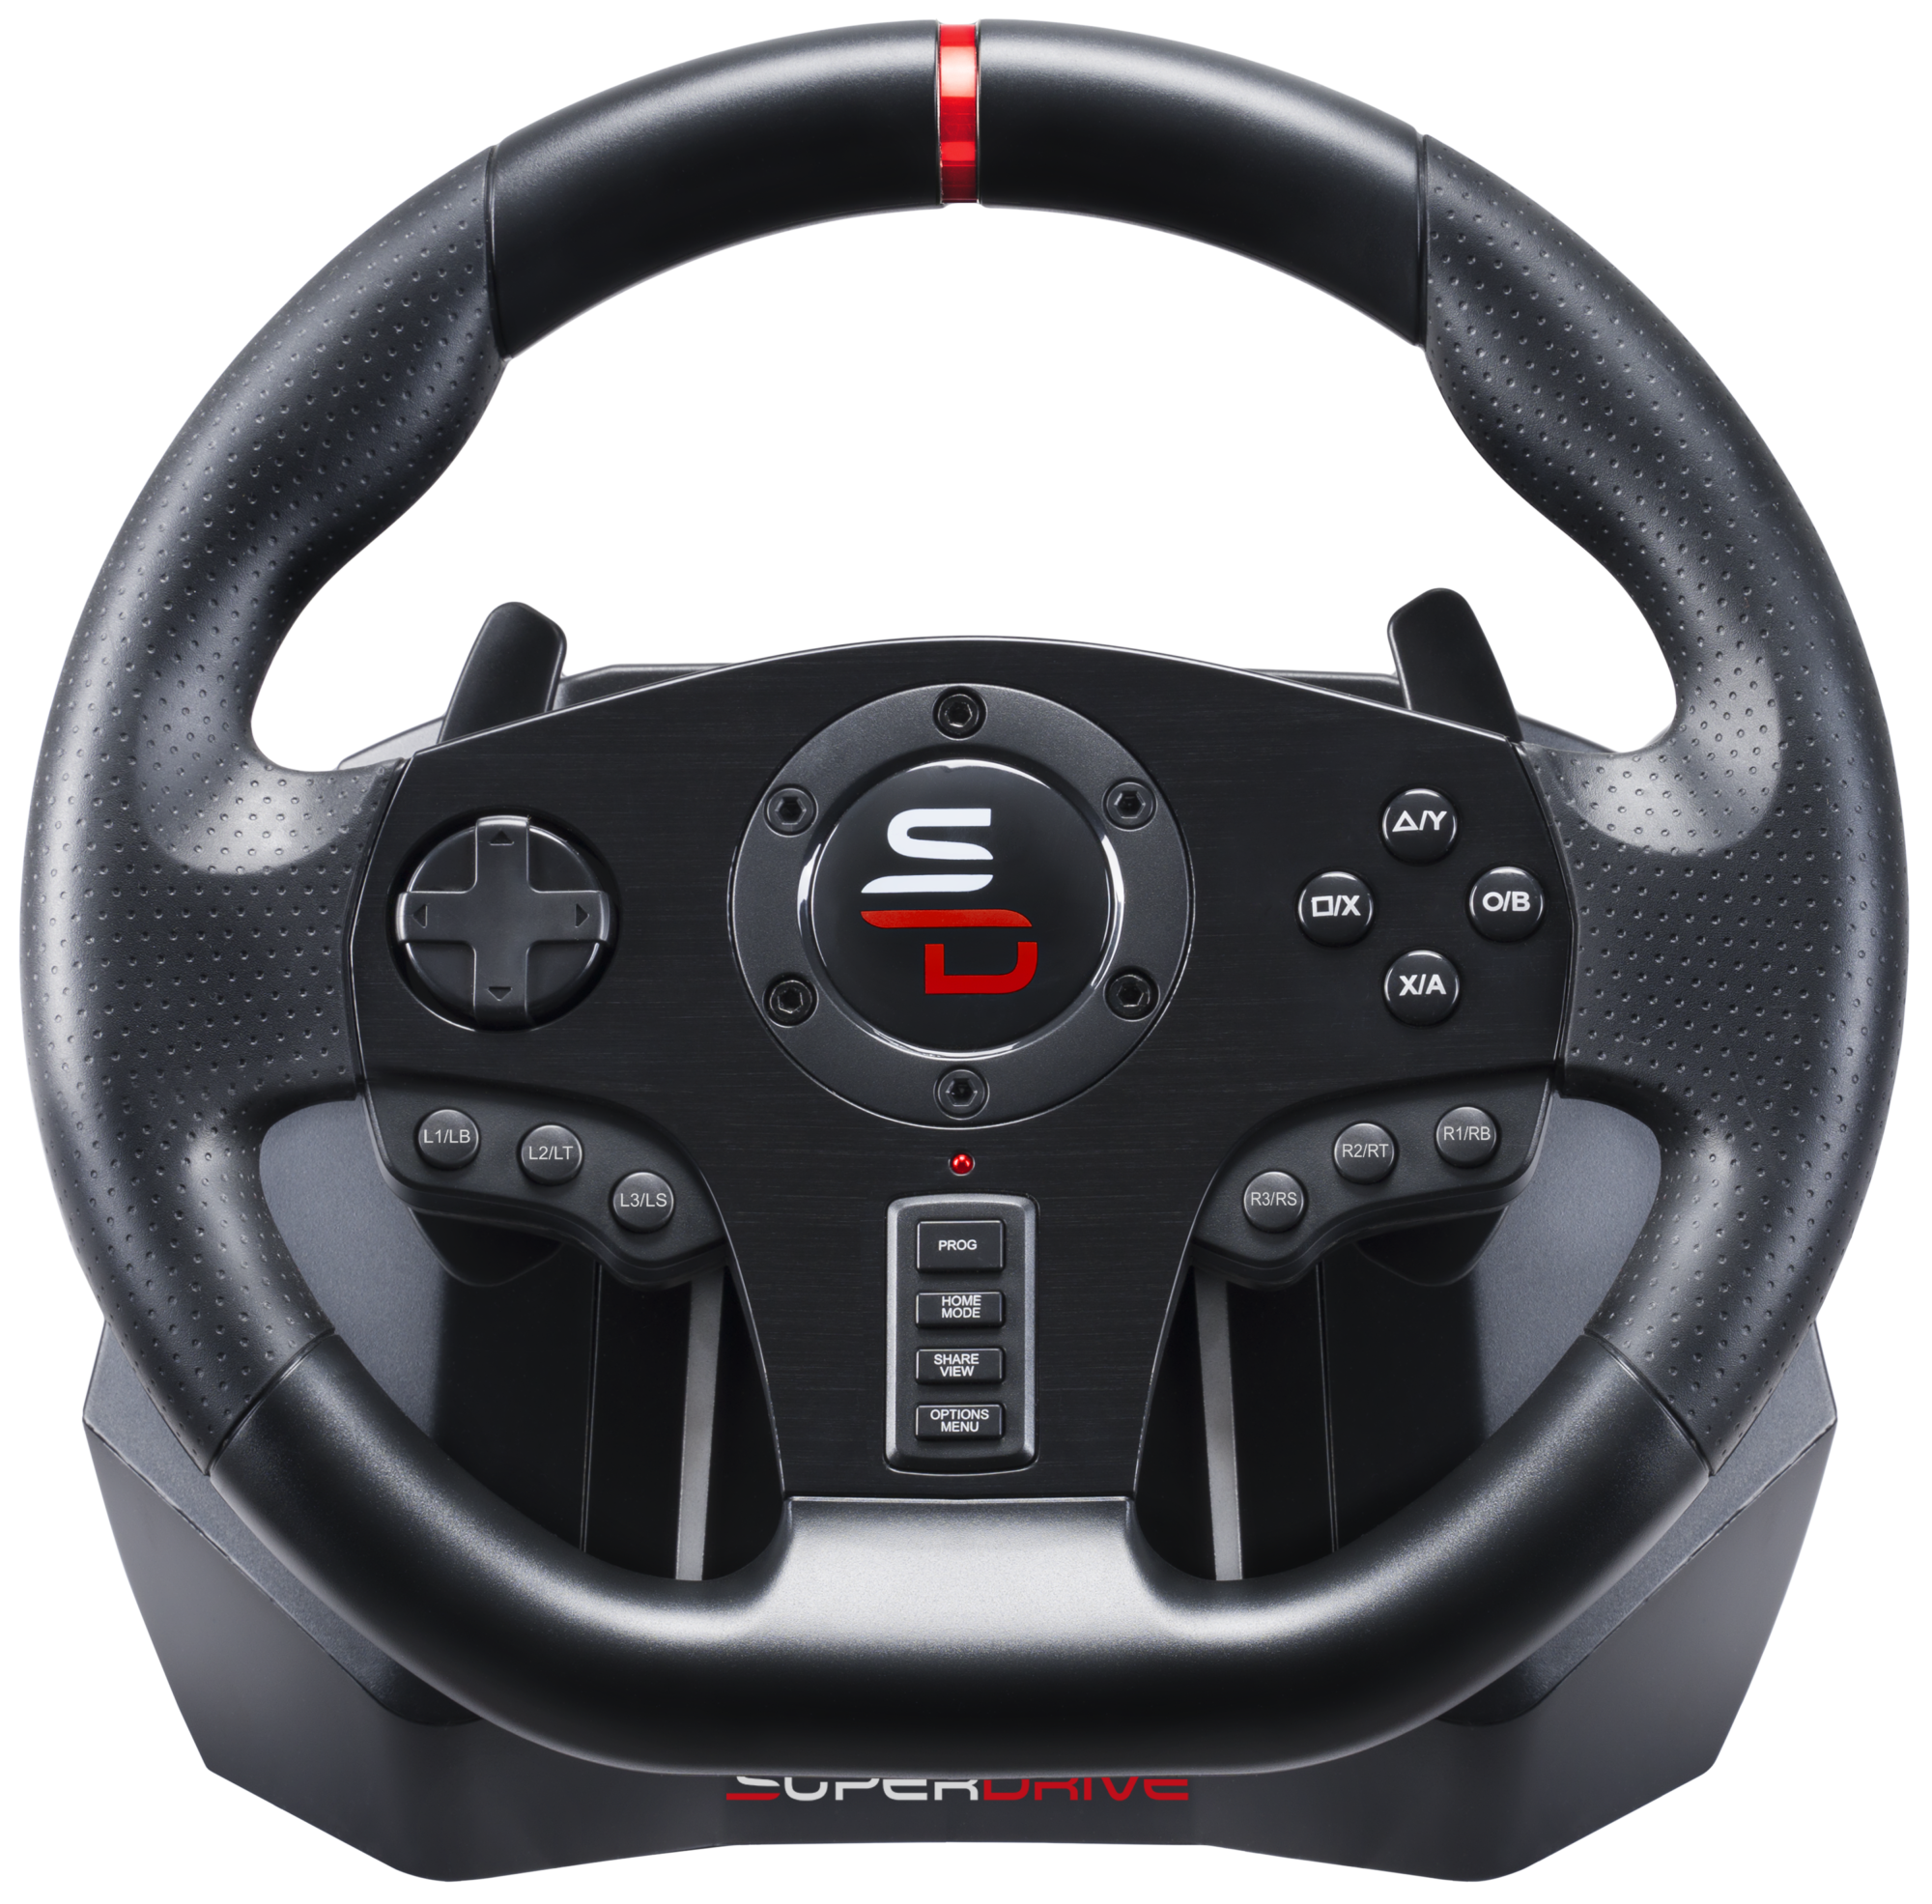 SUBSONIC DRIVE PRO SPORTS GS850-X